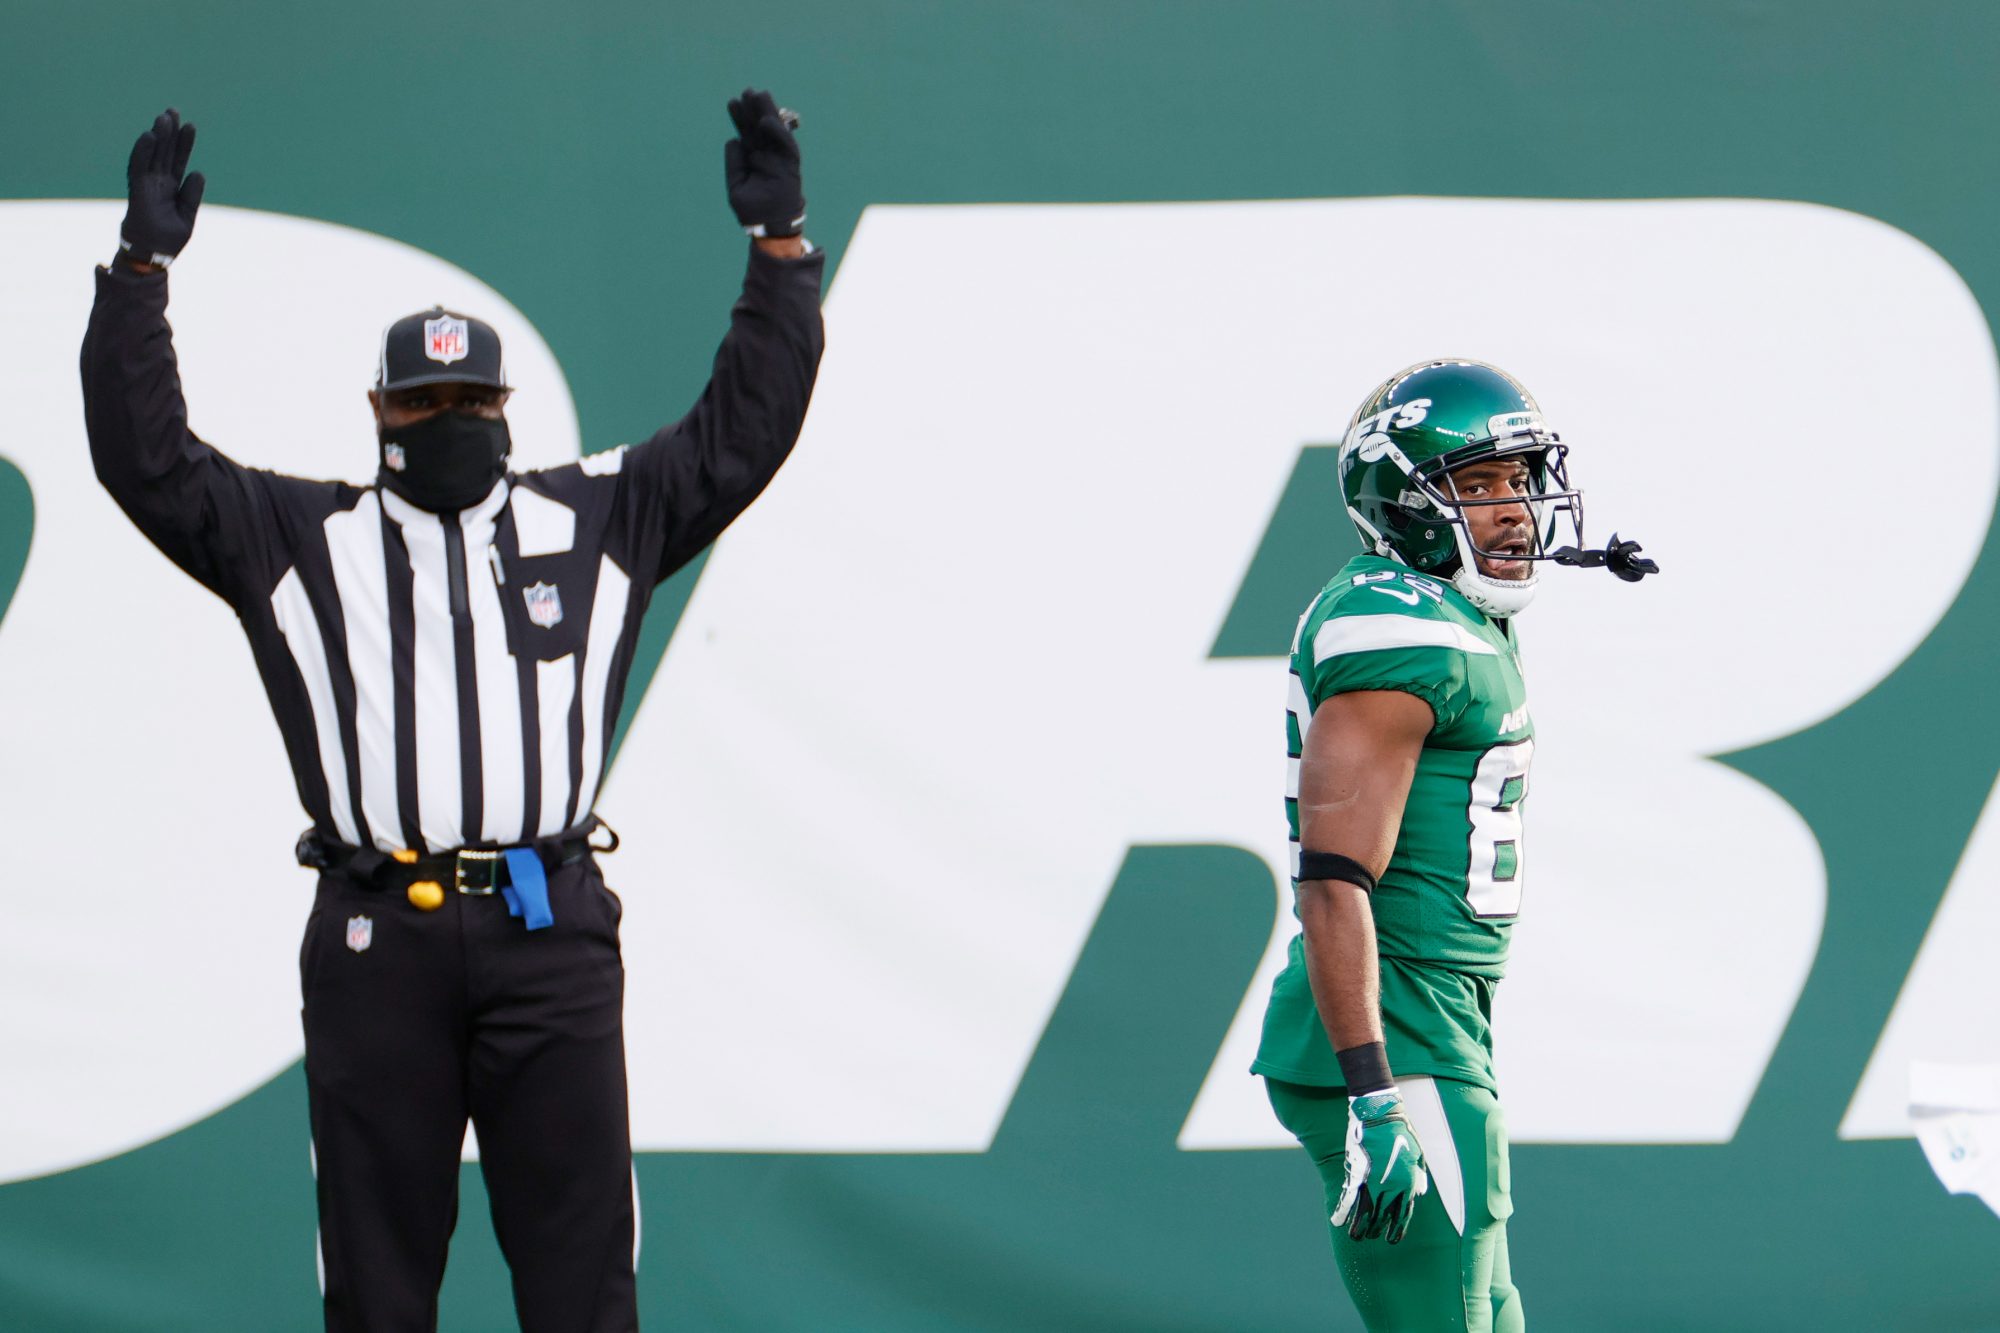 A referee signals "touchdown" behind a Jets player whose conflicted expression is inscrutable.